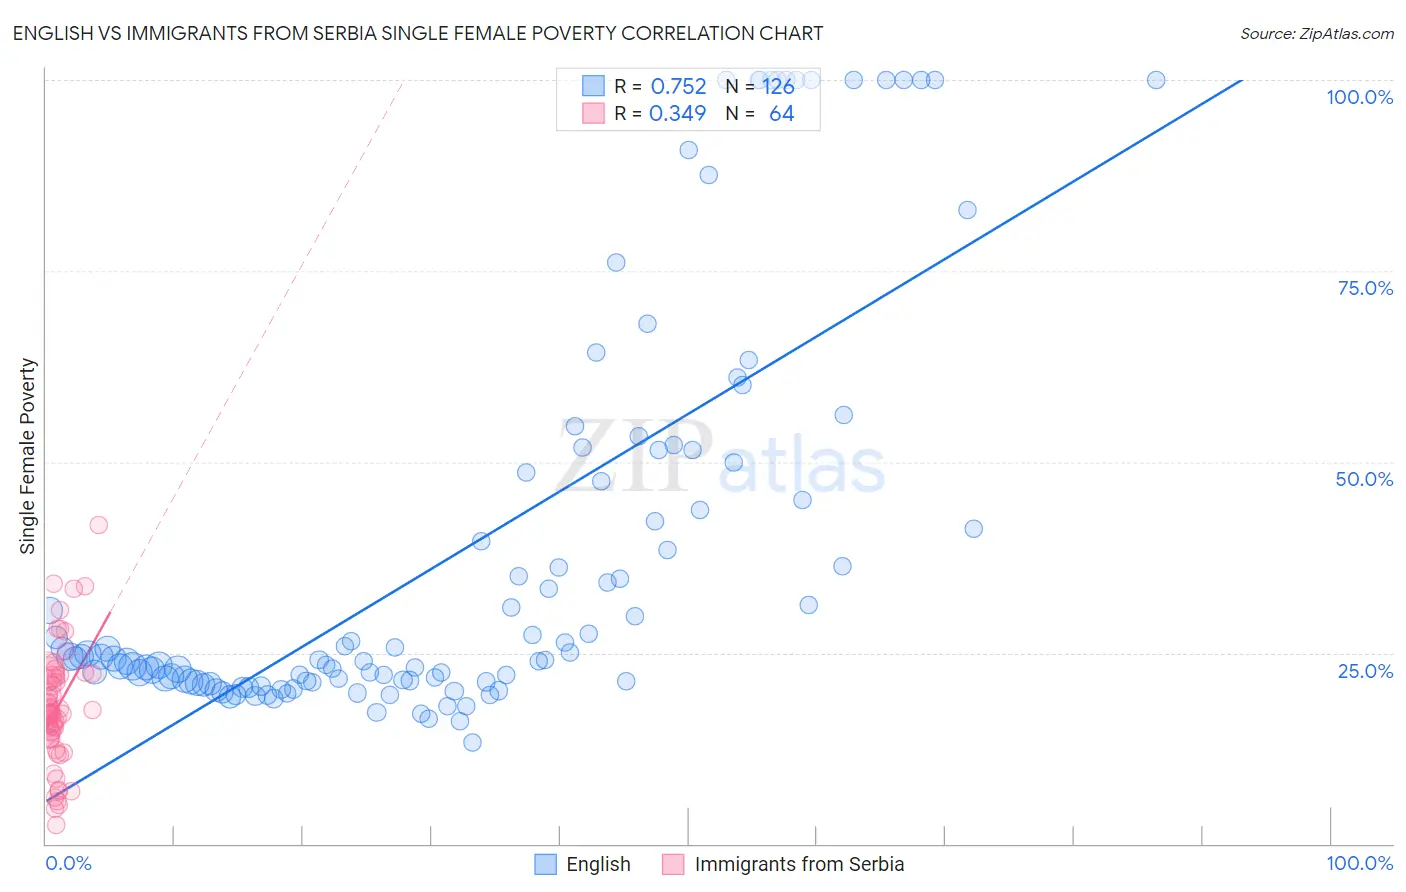 English vs Immigrants from Serbia Single Female Poverty